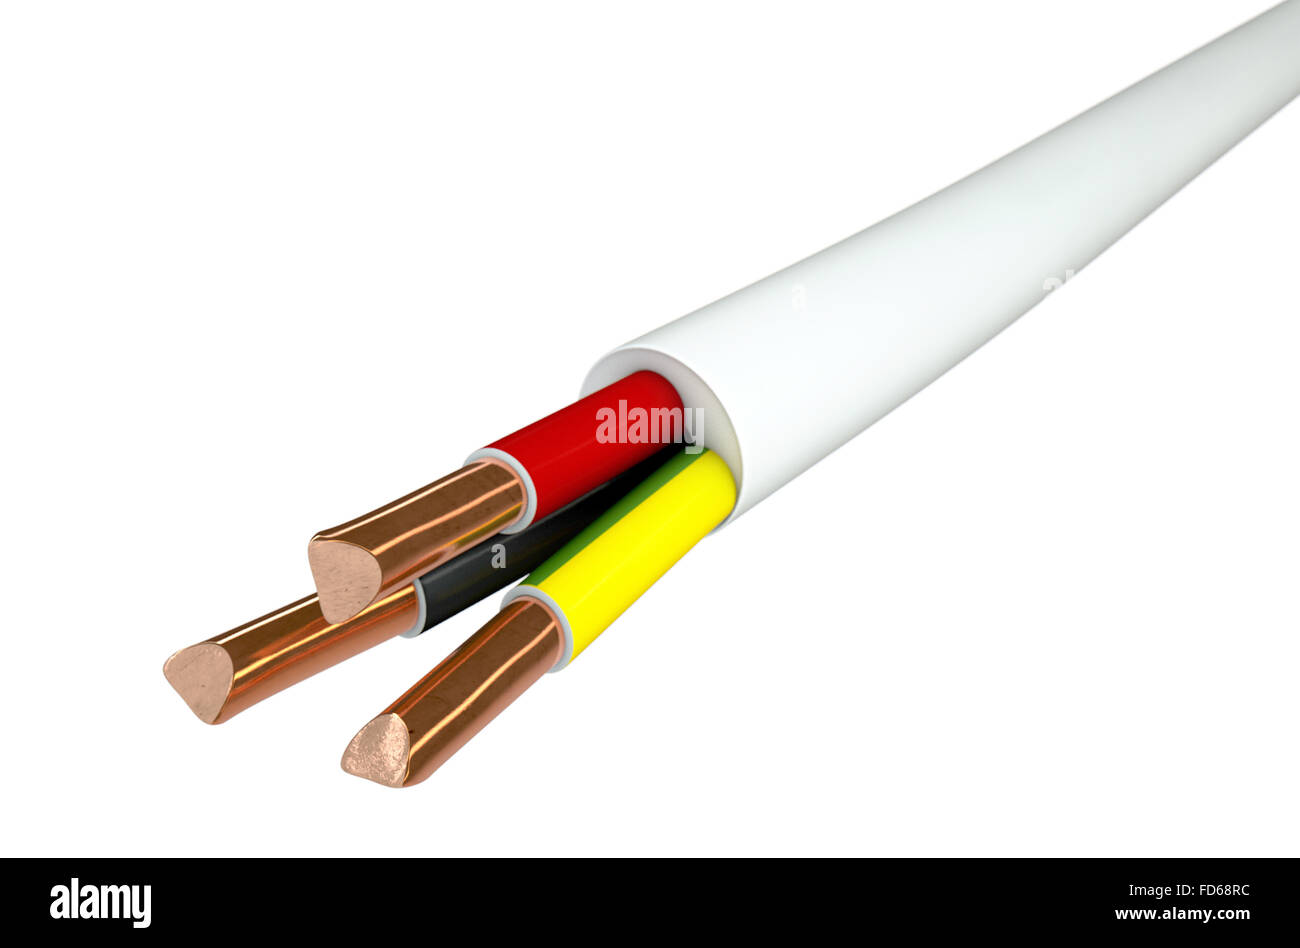 Pure Copper Wire Isolated on White Background, Energy Industry Concept  Stock Photo - Alamy